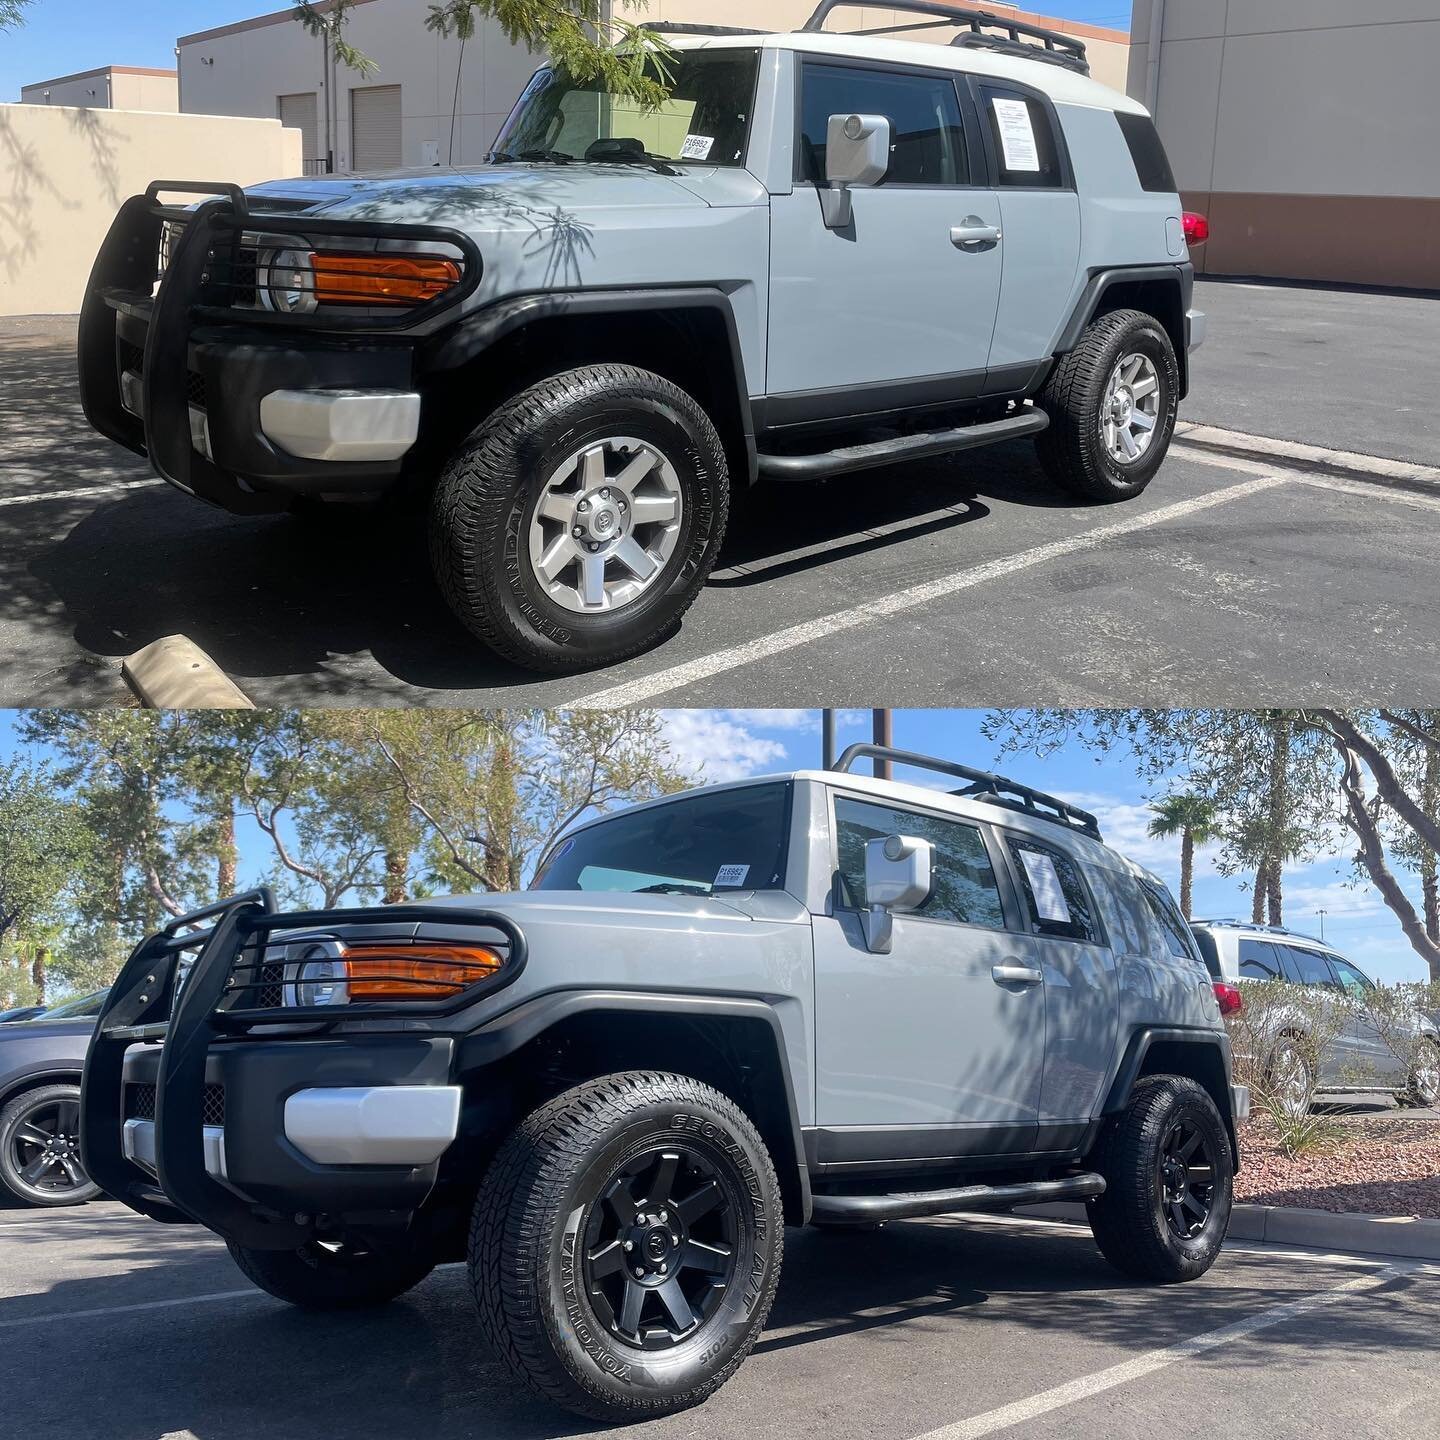 Before ⬇️ After
Powder coated rims satin black on this FJ Cruiser 🔥